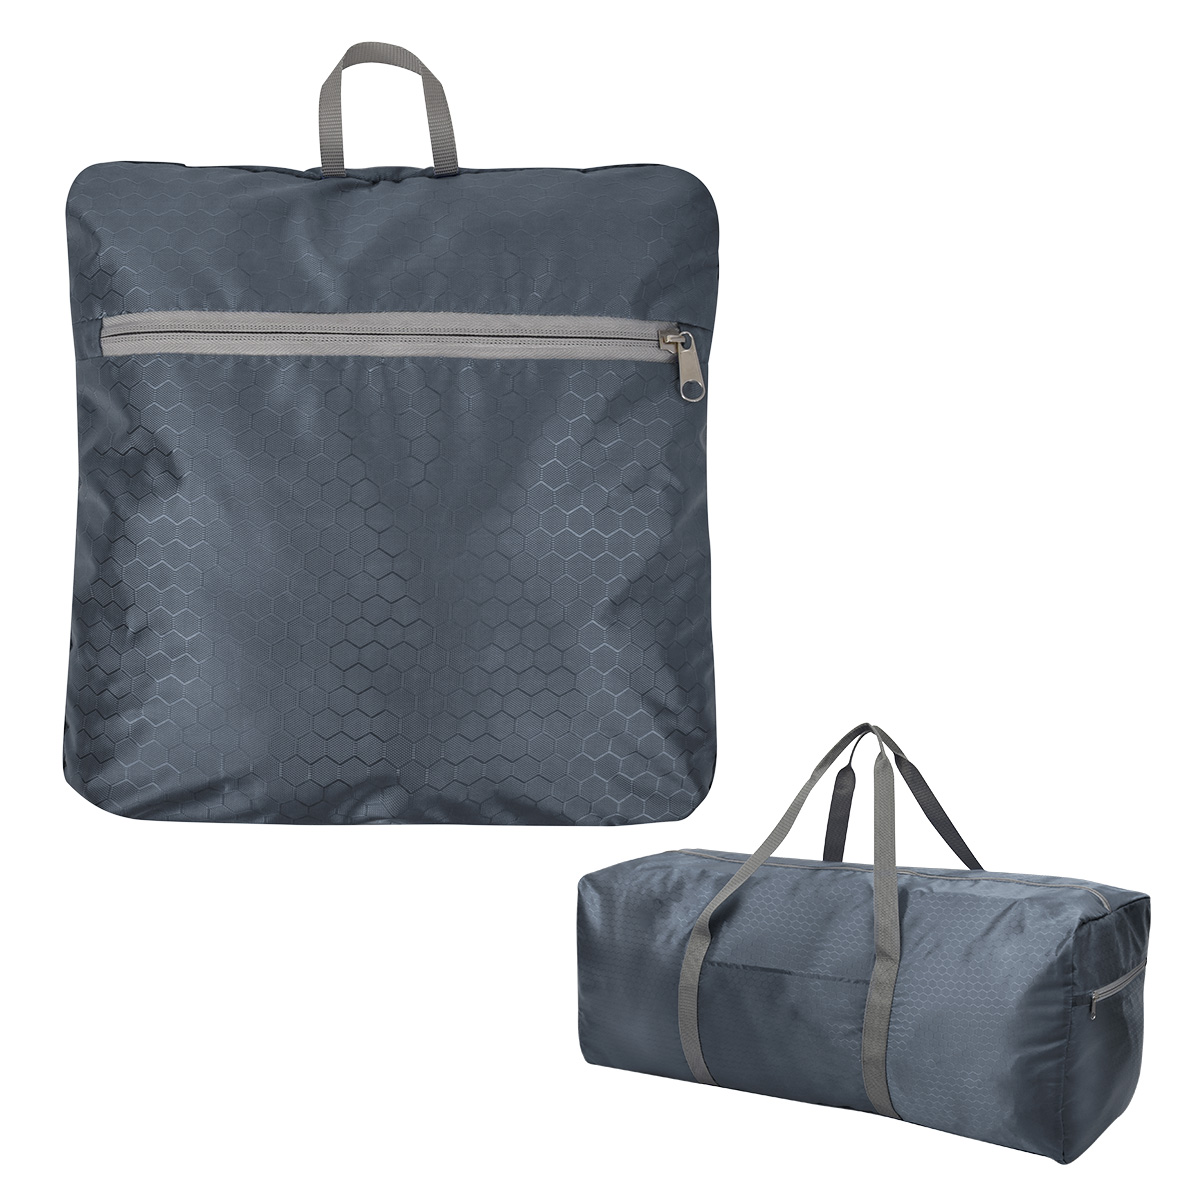 Printed Frequent Flyer Foldable Duffel Bag